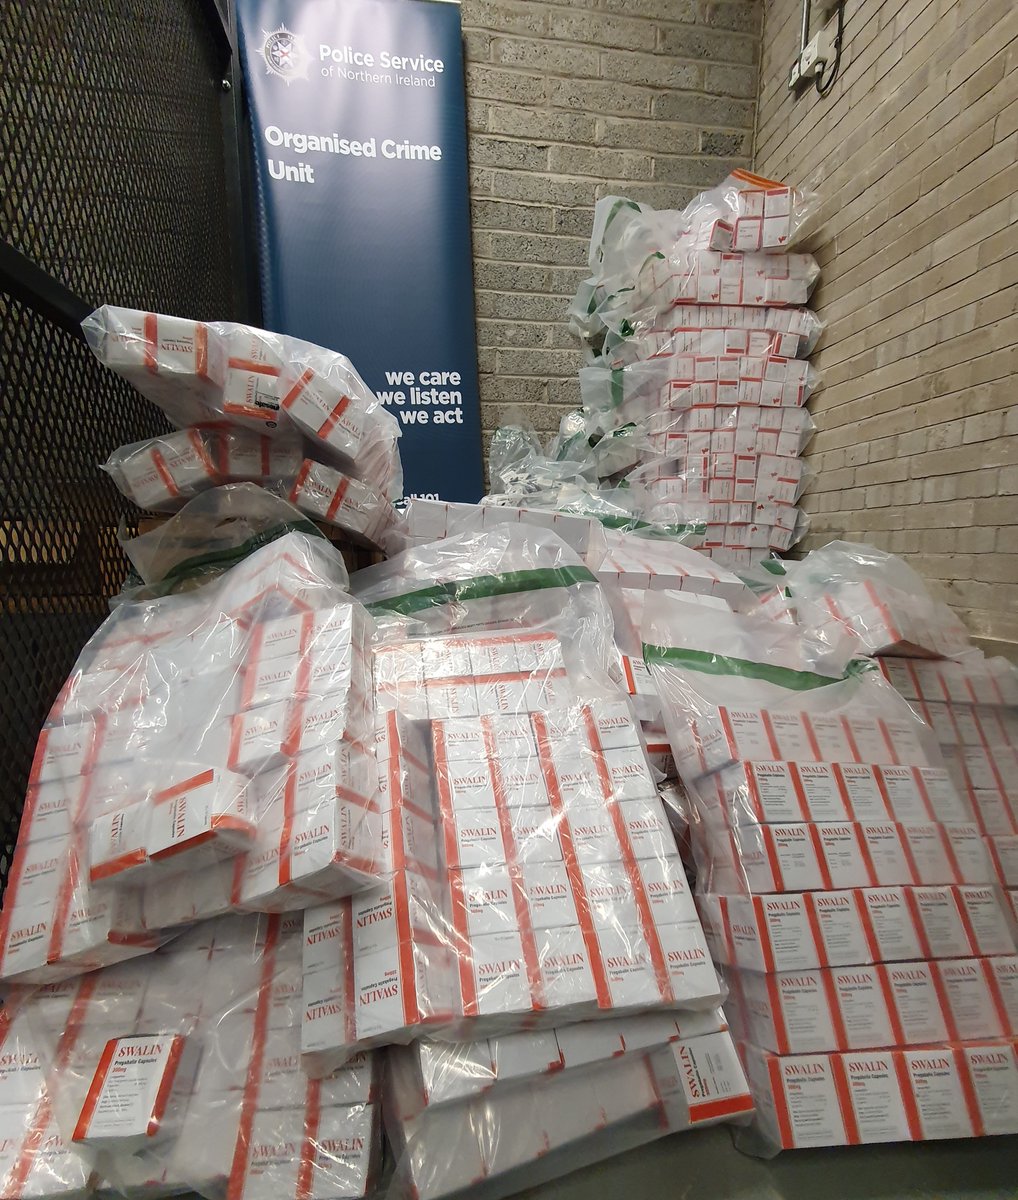 A large quantity of suspected class C controlled drugs have been seized during joint searches carried out by officers in our Organised Crime Unit and colleagues in UK Border Force.
 
orlo.uk/GuTkE

#OpDealbreaker